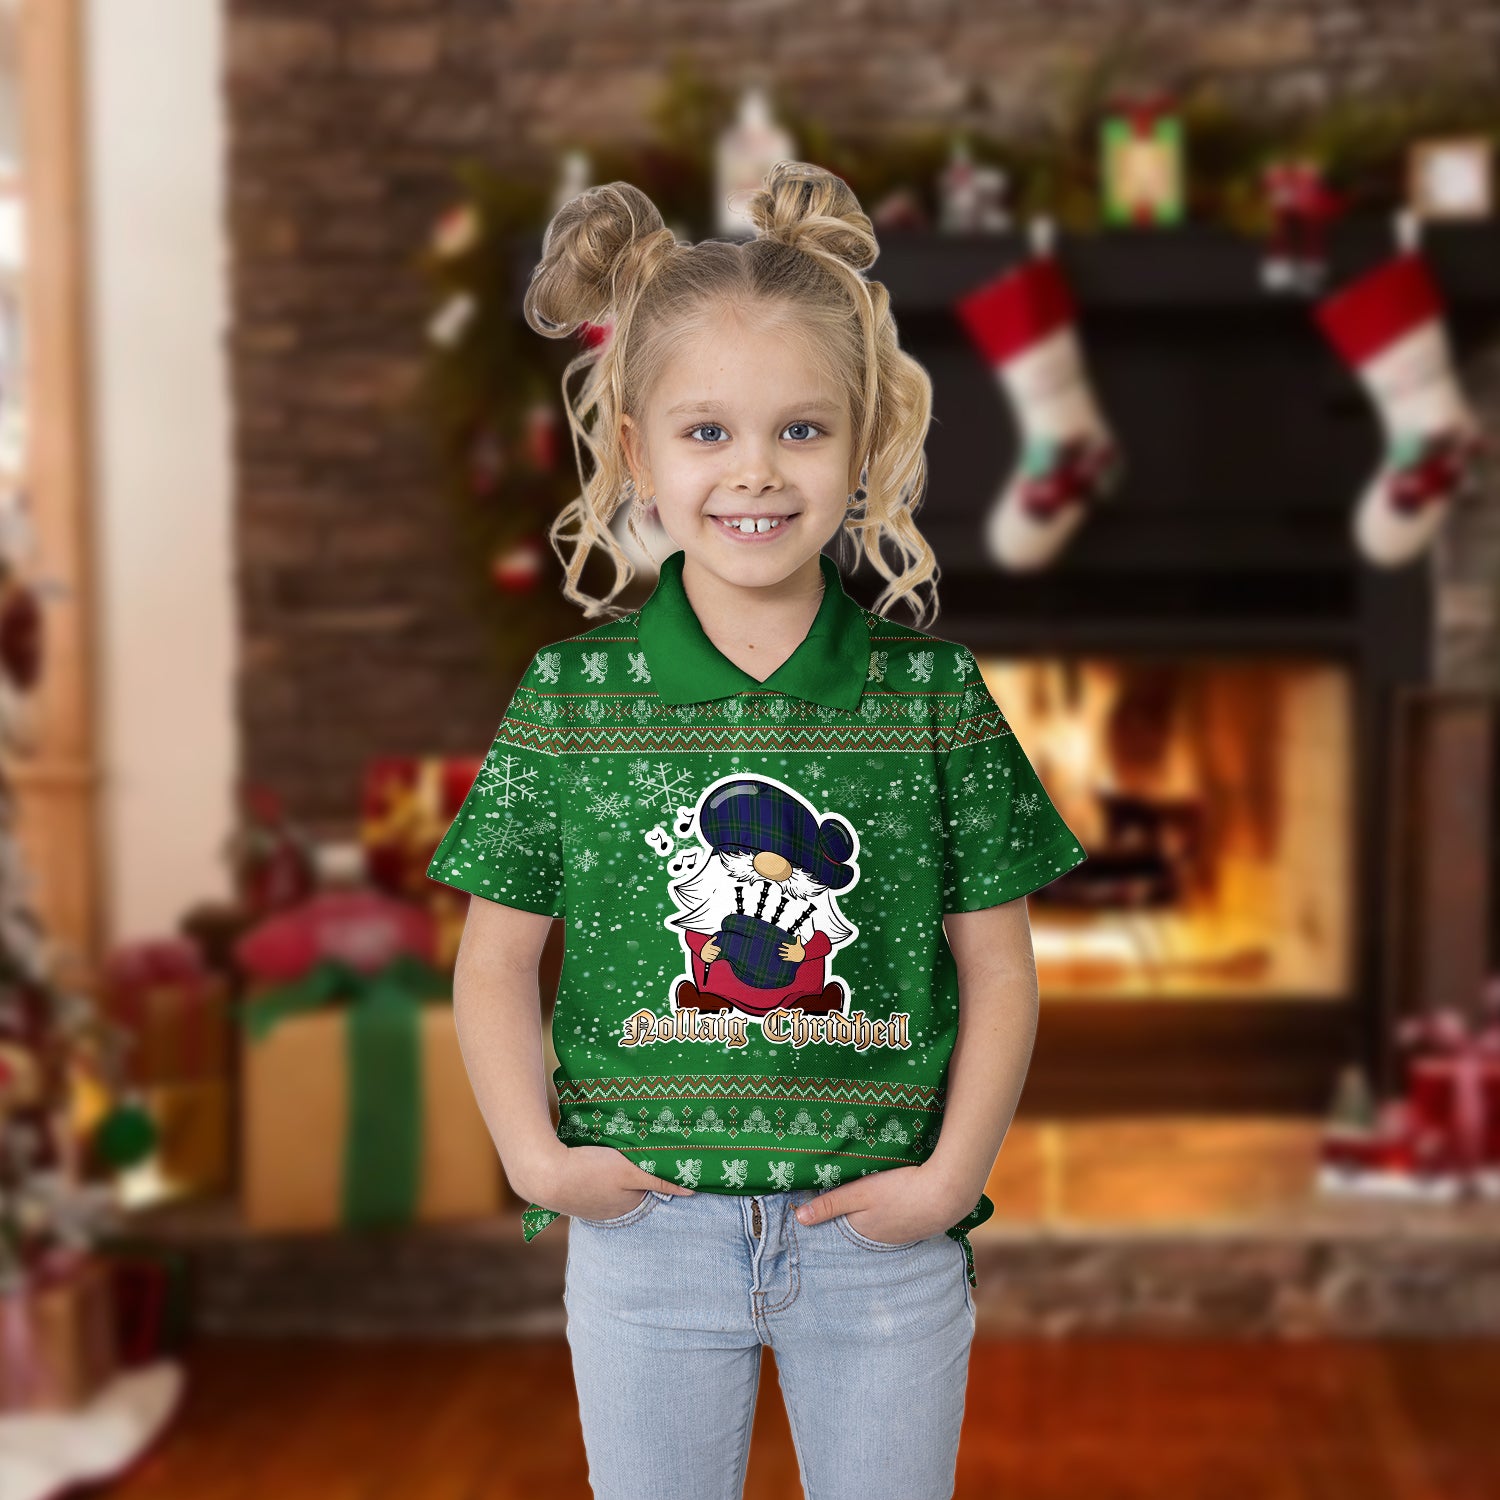 Lewis of Wales Clan Christmas Family Polo Shirt with Funny Gnome Playing Bagpipes Kid's Polo Shirt Green - Tartanvibesclothing